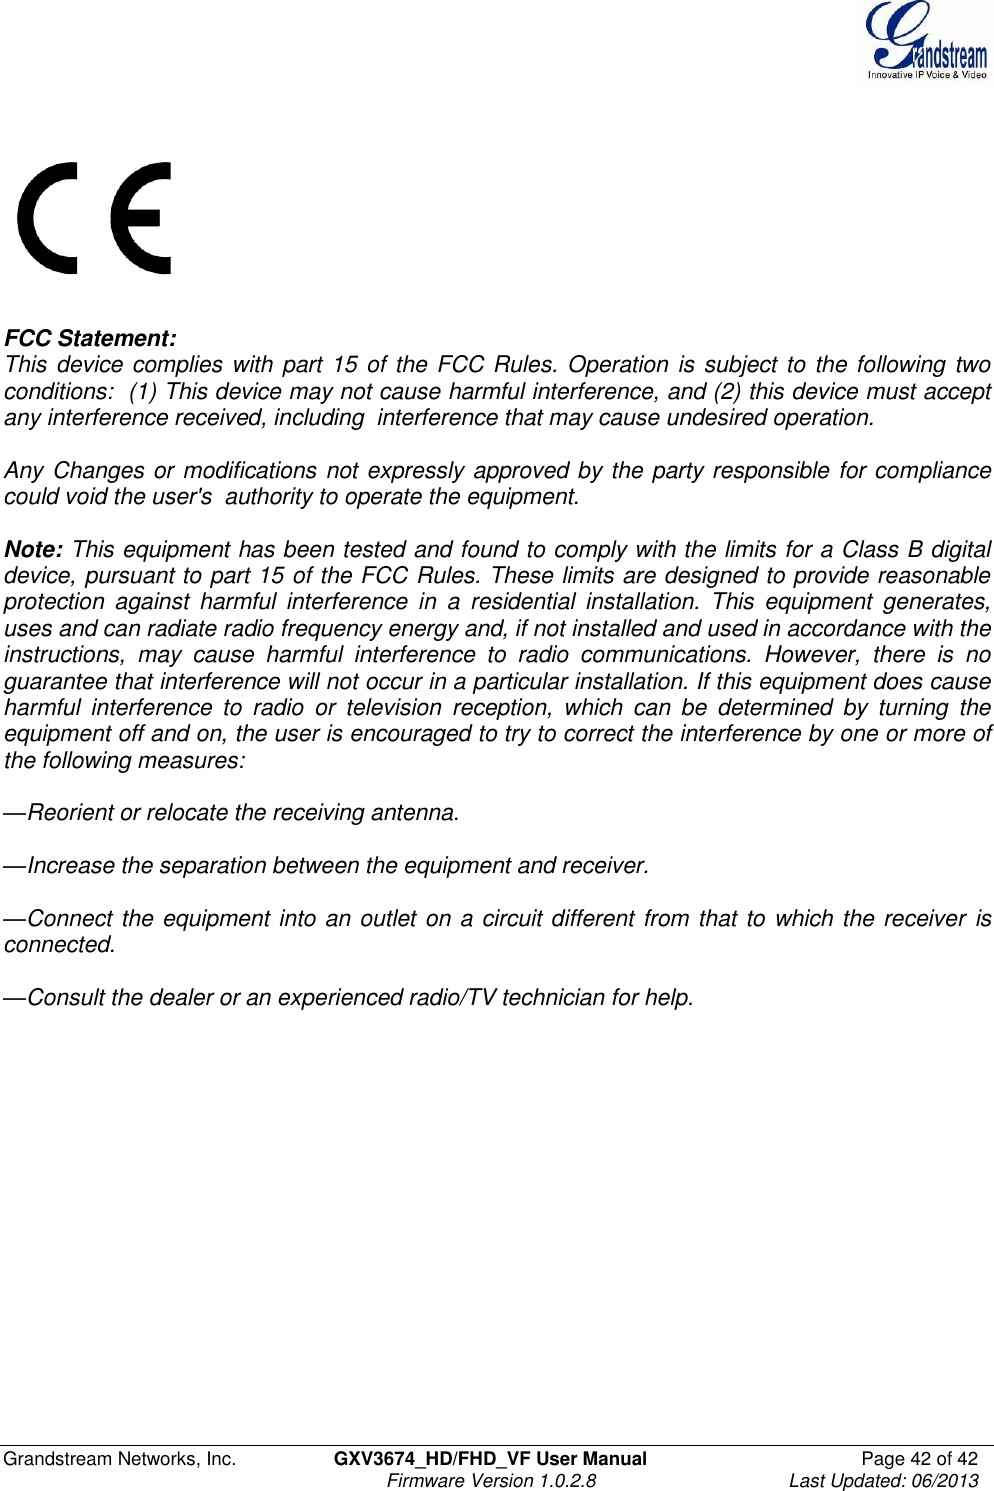  Grandstream Networks, Inc.  GXV3674_HD/FHD_VF User Manual  Page 42 of 42   Firmware Version 1.0.2.8  Last Updated: 06/2013      FCC Statement:    This device complies with part 15 of the FCC Rules. Operation is subject to the following two conditions:  (1) This device may not cause harmful interference, and (2) this device must accept any interference received, including  interference that may cause undesired operation.    Any Changes or modifications not expressly approved by the party responsible for compliance could void the user&apos;s  authority to operate the equipment.     Note: This equipment has been tested and found to comply with the limits for a Class B digital device, pursuant to part 15 of the FCC Rules. These limits are designed to provide reasonable protection  against  harmful  interference  in  a  residential  installation.  This  equipment  generates, uses and can radiate radio frequency energy and, if not installed and used in accordance with the instructions,  may  cause  harmful  interference  to  radio  communications.  However,  there  is  no guarantee that interference will not occur in a particular installation. If this equipment does cause harmful  interference  to  radio  or  television  reception,  which  can  be  determined  by  turning  the equipment off and on, the user is encouraged to try to correct the interference by one or more of the following measures:   —Reorient or relocate the receiving antenna.   —Increase the separation between the equipment and receiver.   —Connect the equipment into an outlet on a circuit different from that to which the receiver is connected.  —Consult the dealer or an experienced radio/TV technician for help. 